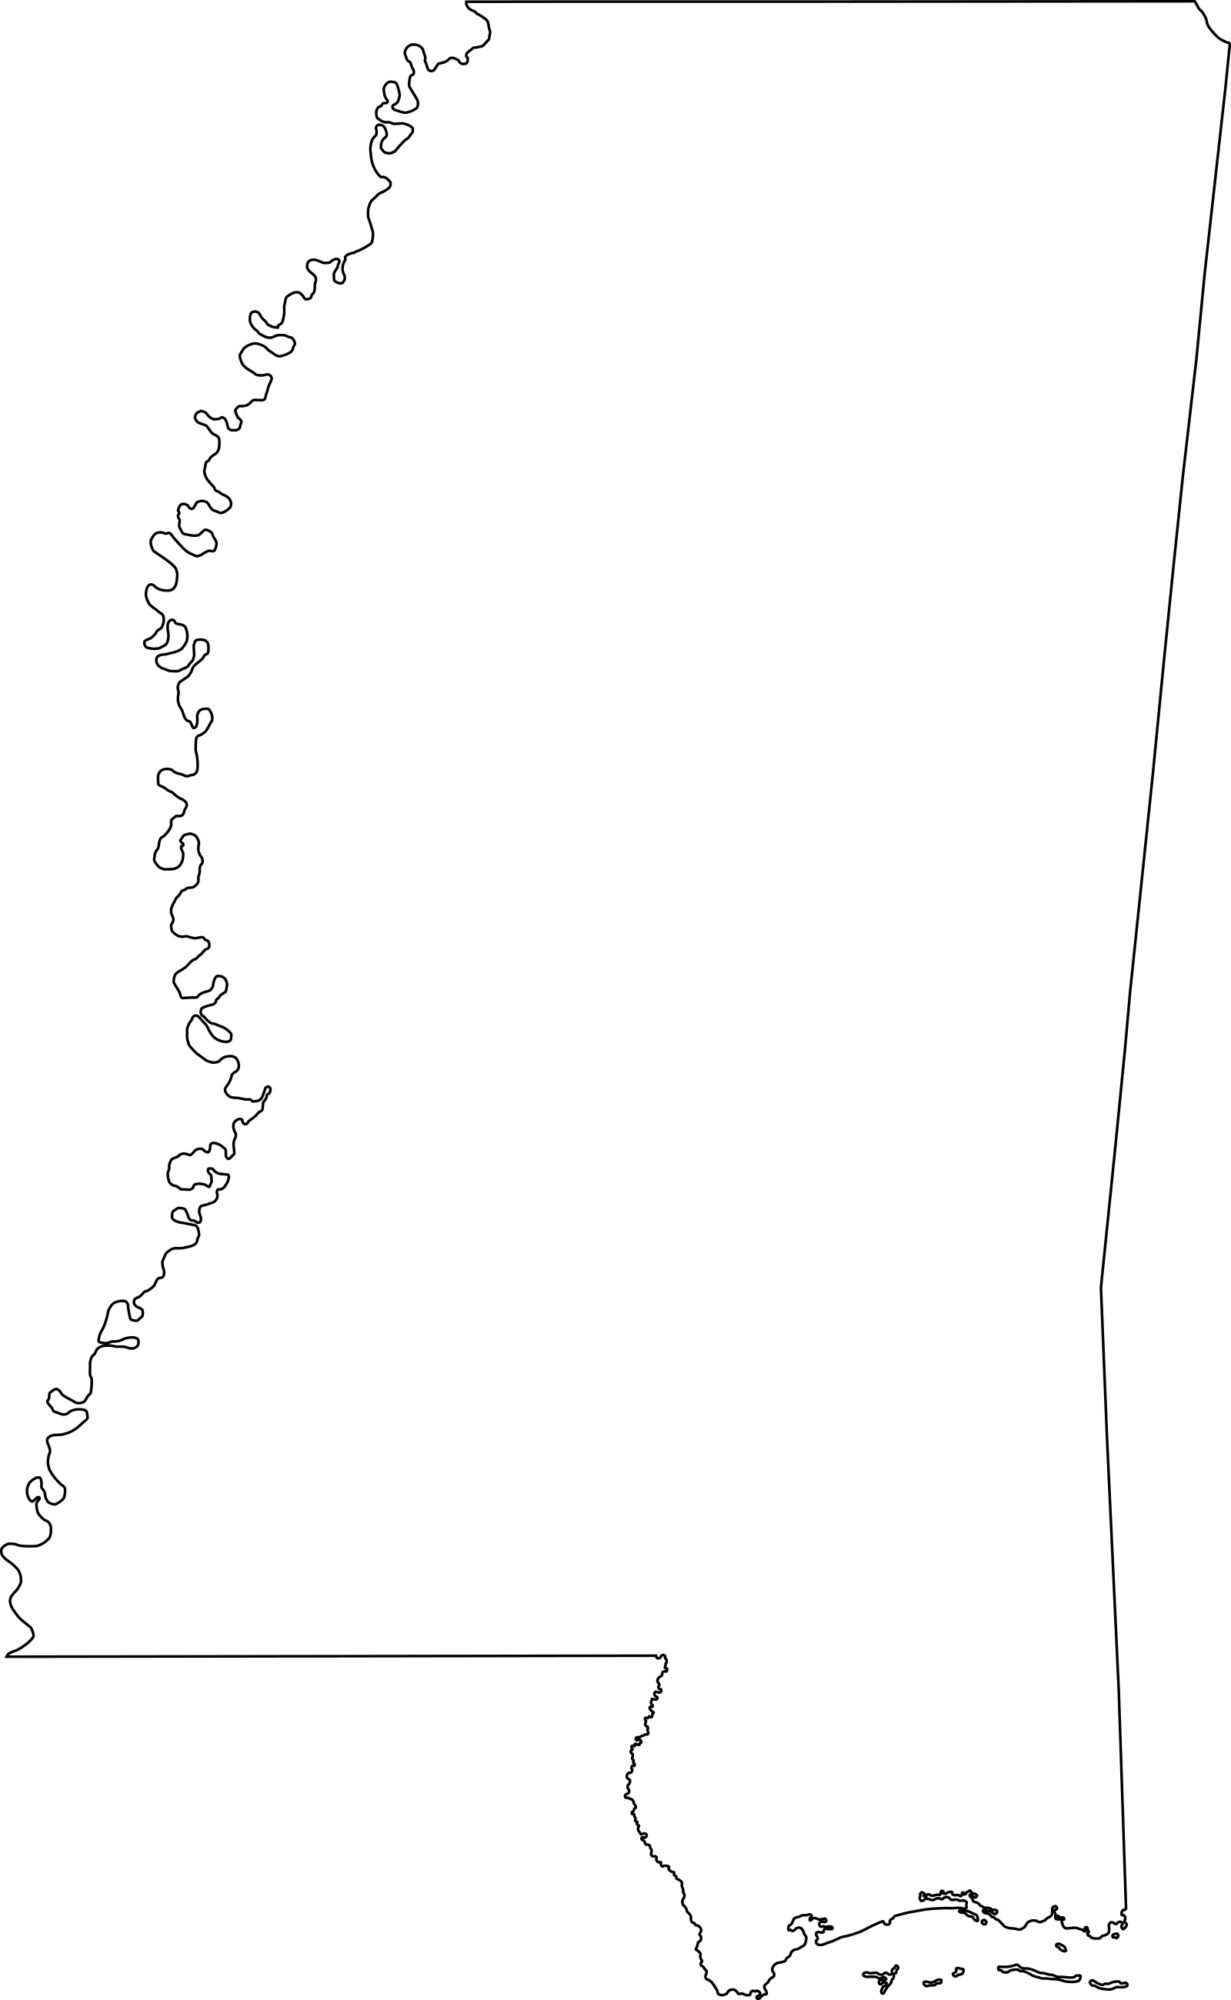 Mississippi blank outline Map | Large Printable High Resolution and Standard Map